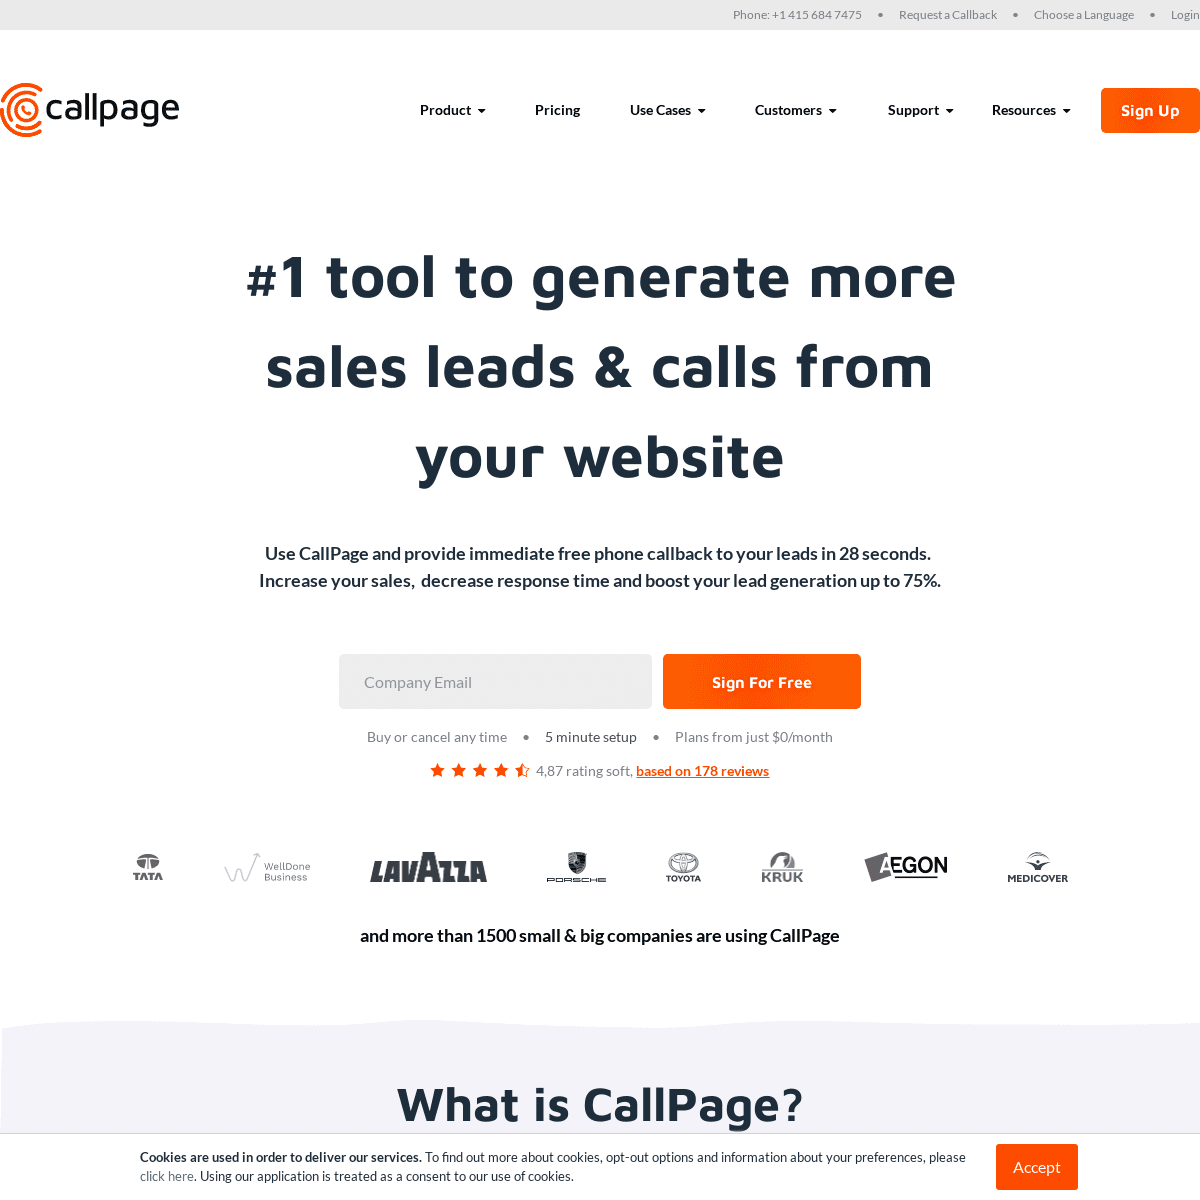 A complete backup of callpage.io